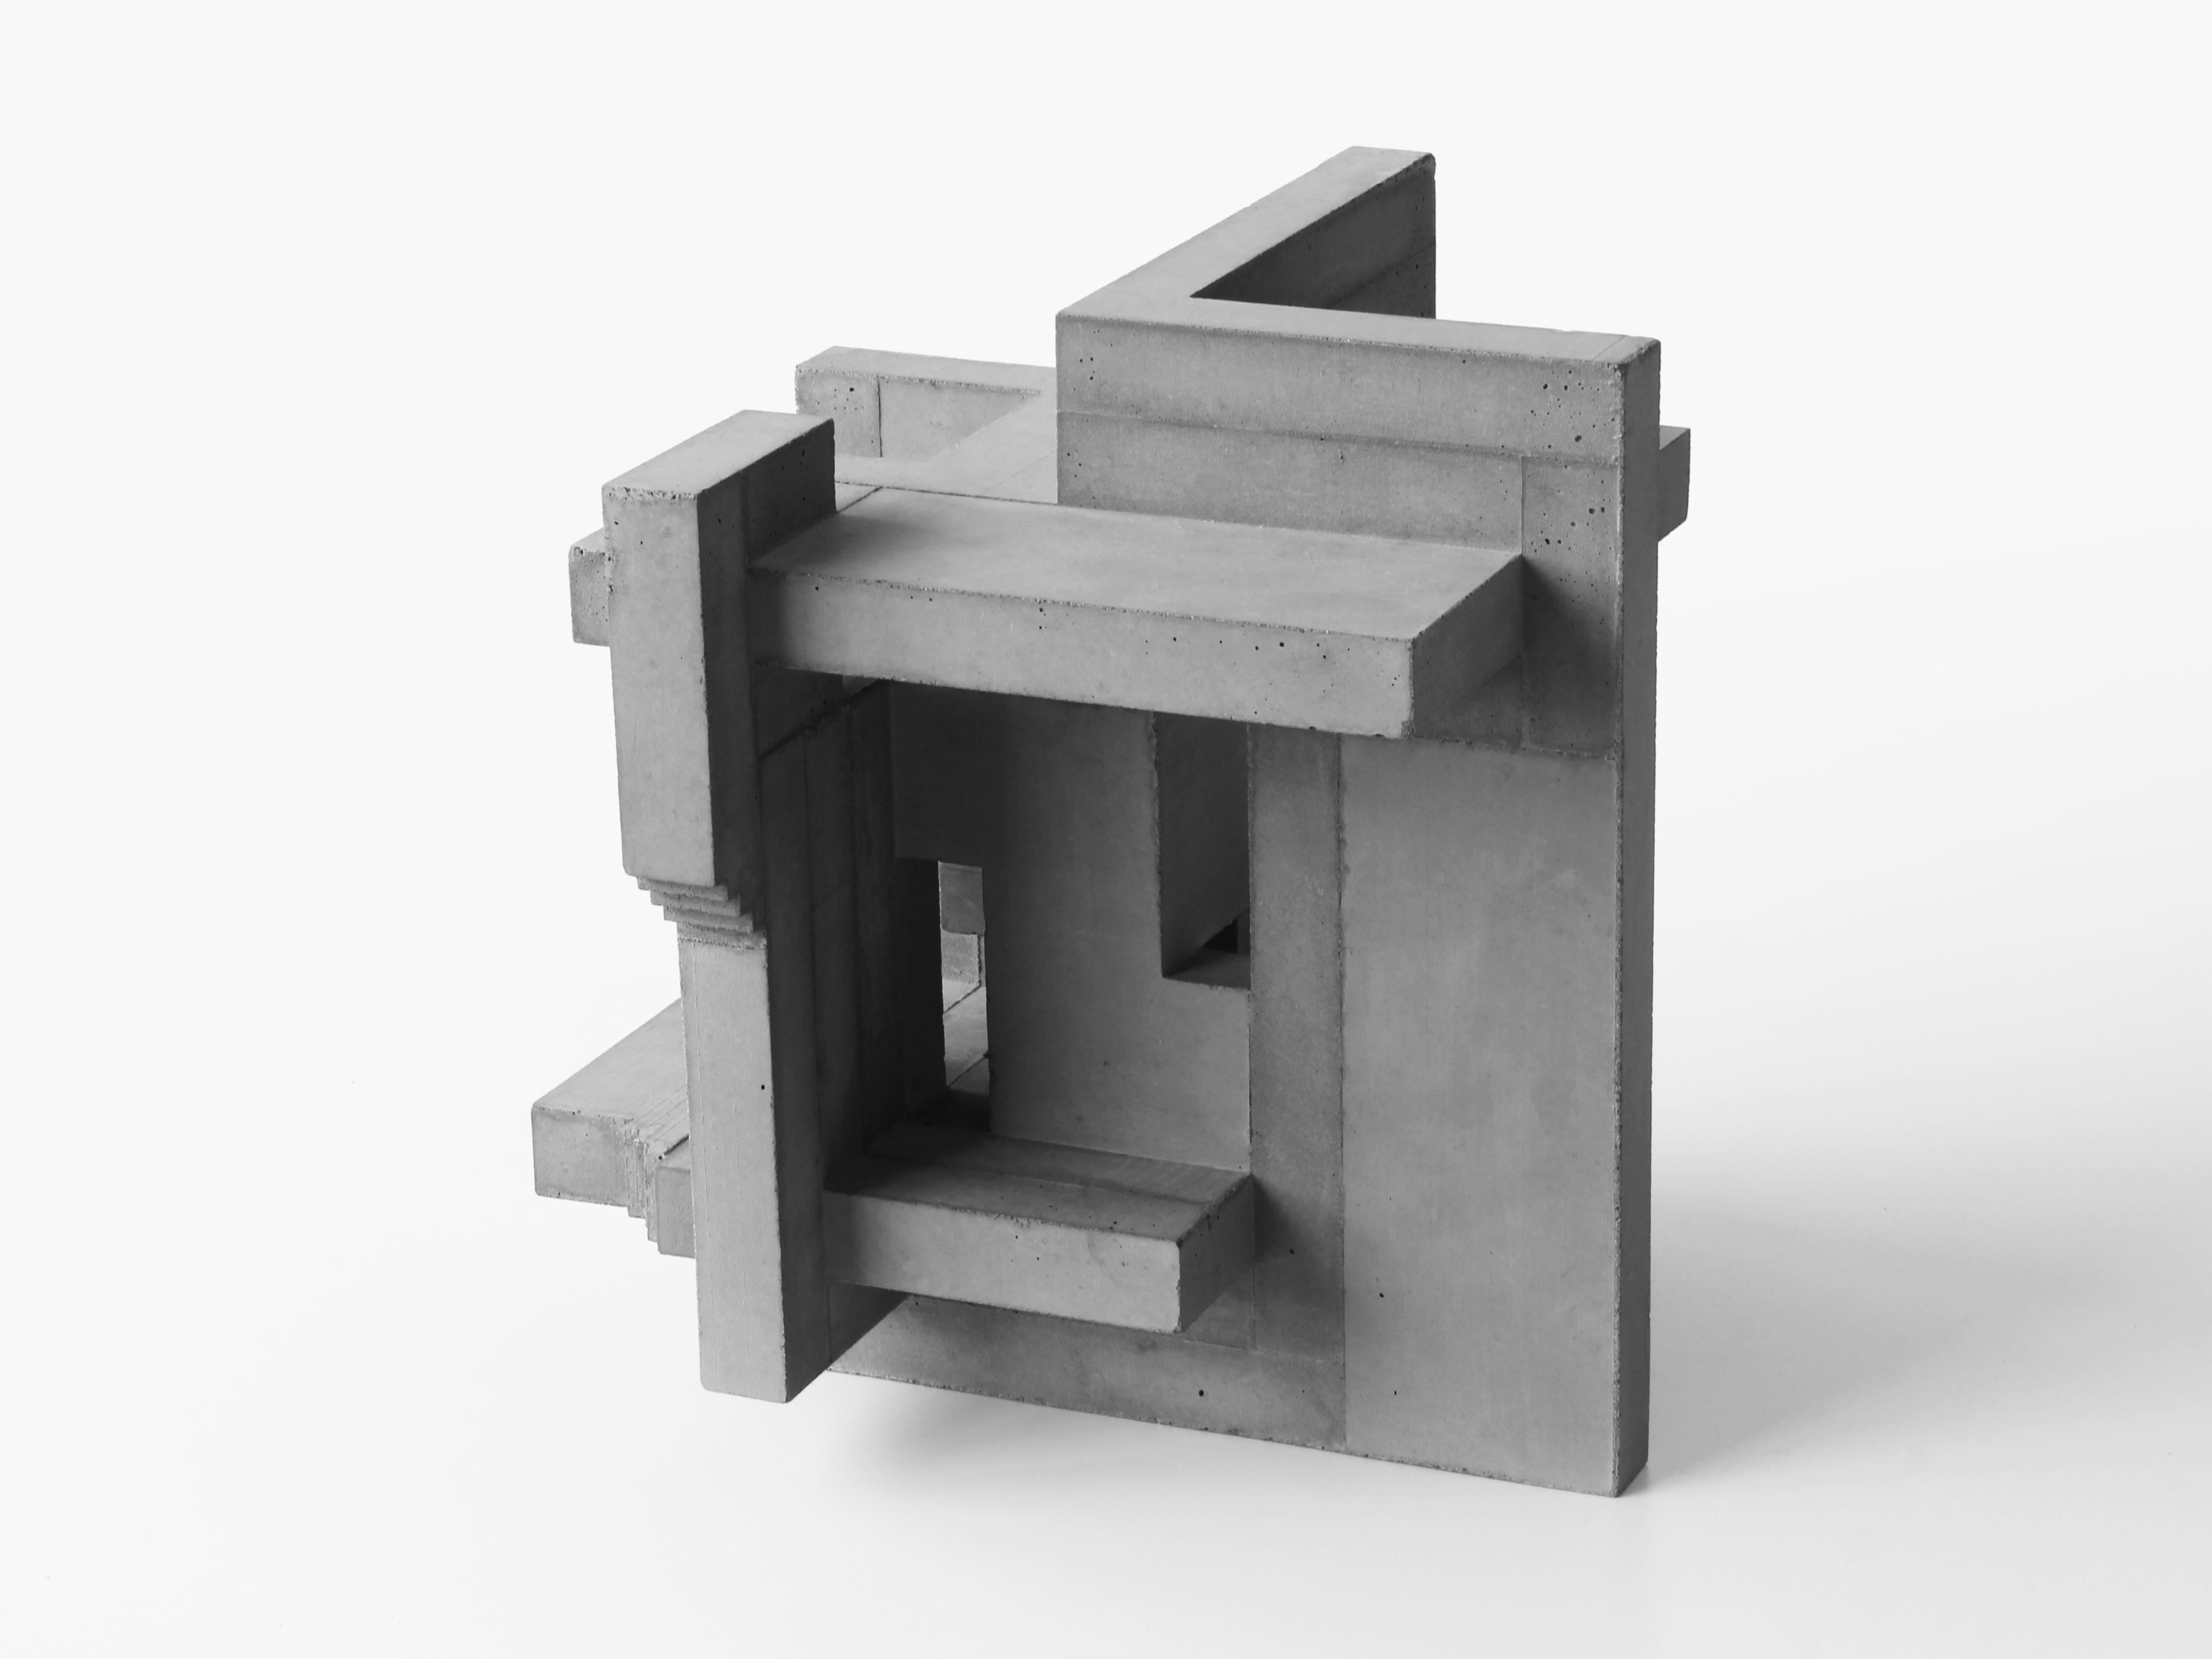 The concrete works of David Umemoto stand as studies about volume. At the juncture of sculpture and architecture, these miniature pieces evoke temporary buildings or monuments standing on far-away lands. The images conveyed in the mind by these